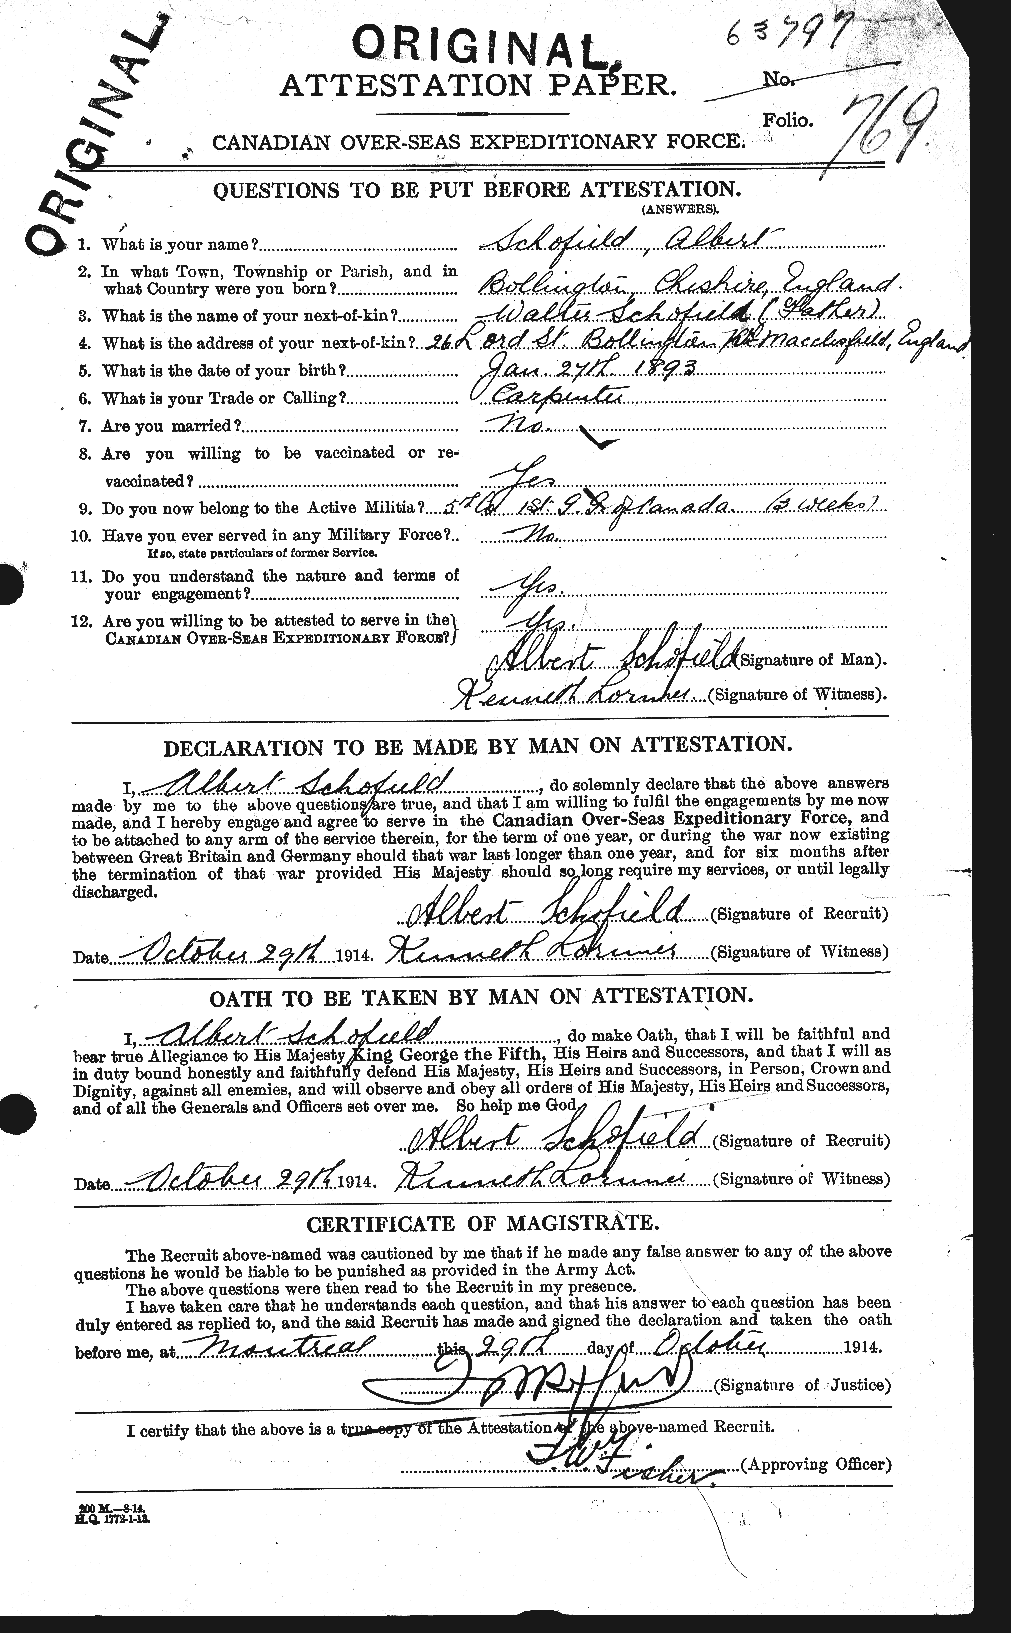 Personnel Records of the First World War - CEF 082230a